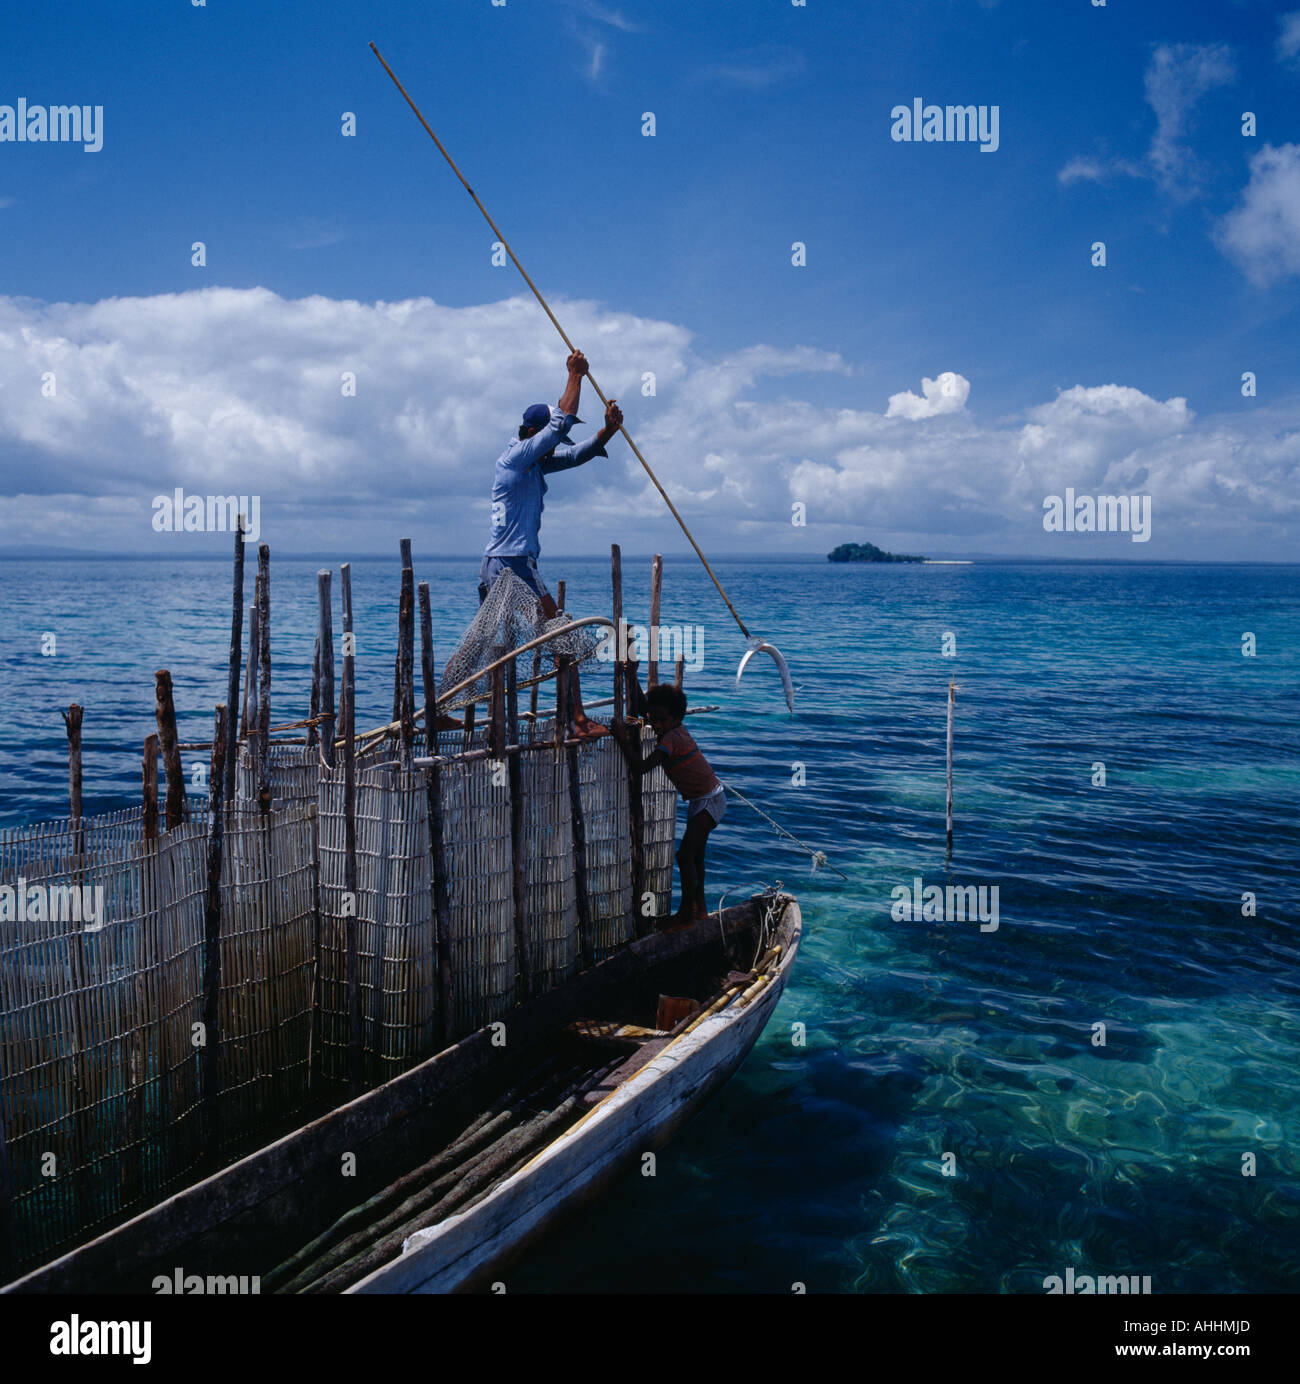 INDONESIA Southeast Asia Irian Jaya Sorong Fisherman on fishtrap by boat  spearing fish in clear water with a long pole Stock Photo - Alamy